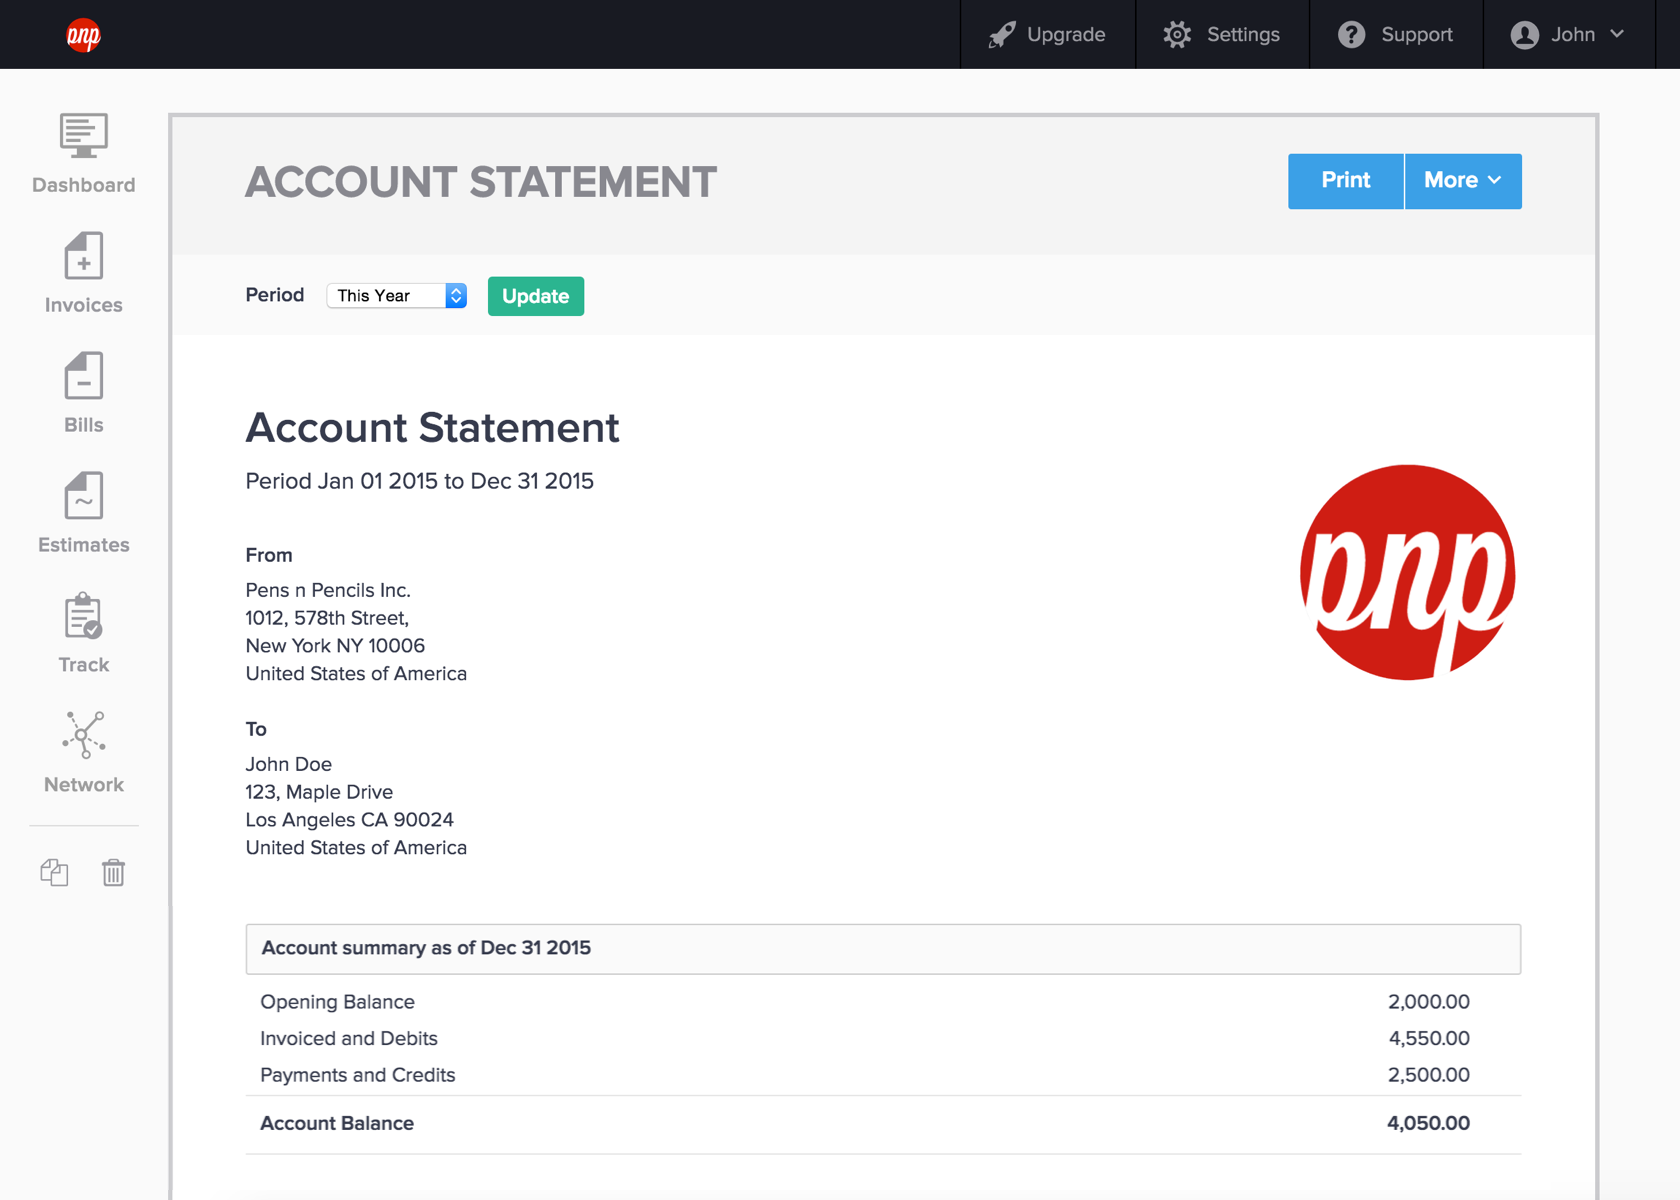 Account Statement in Hiveage